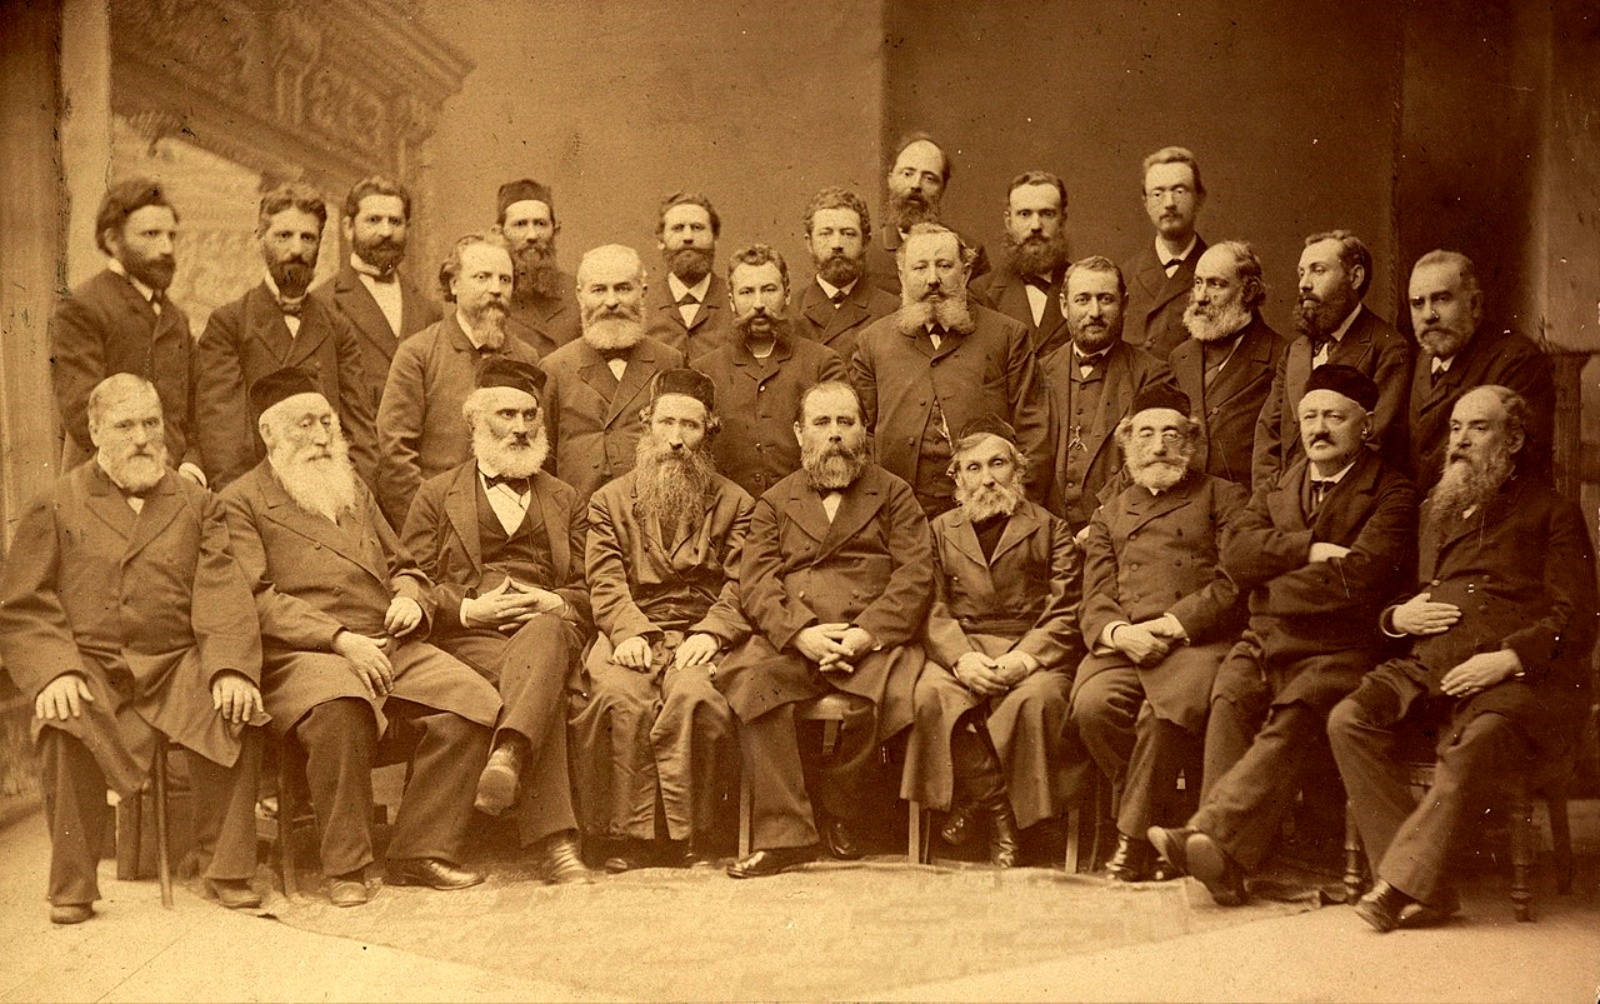 Zionists conference in 1884